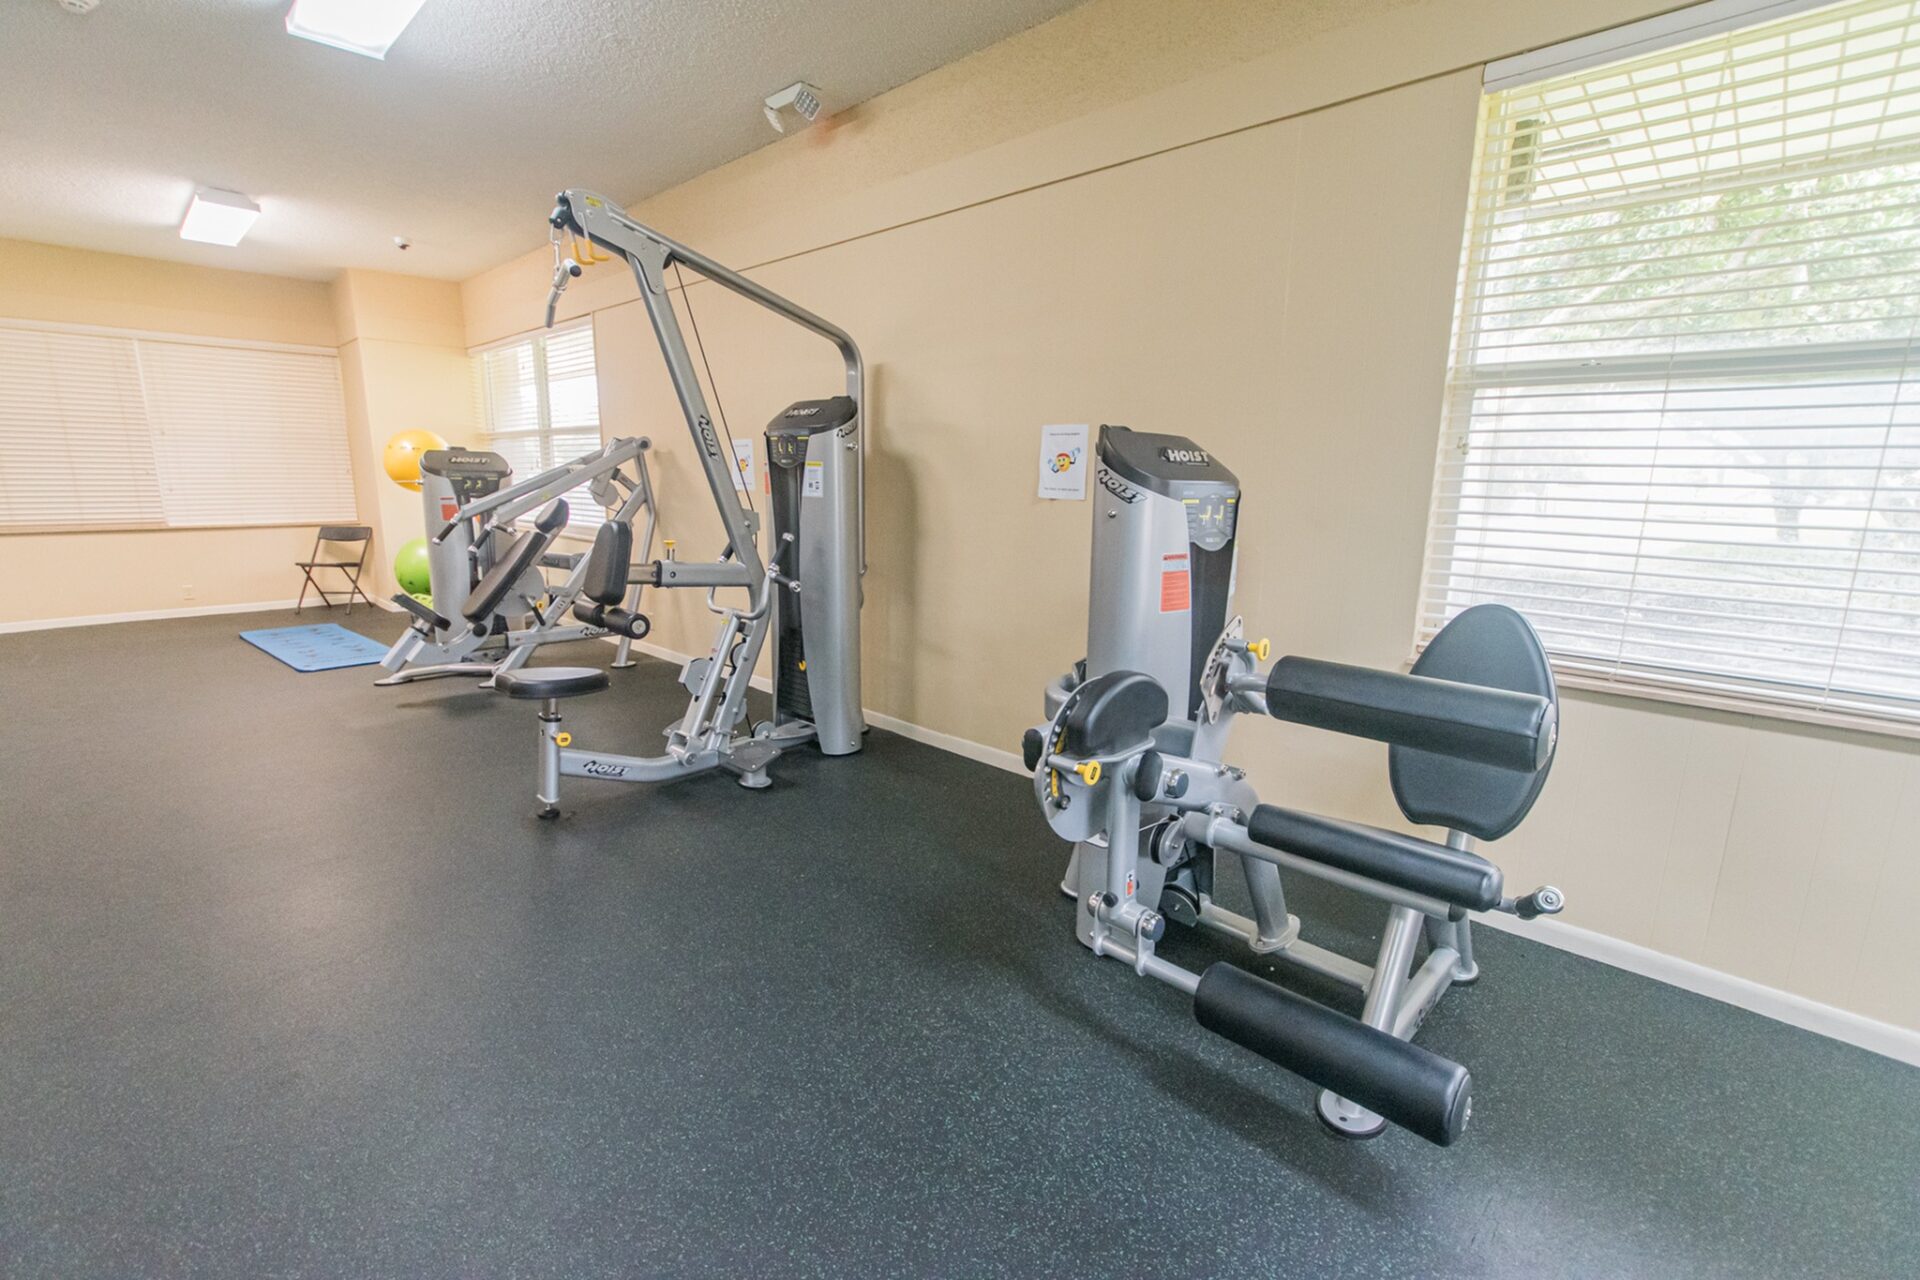 A variety of workout equipment at an indoor gym.